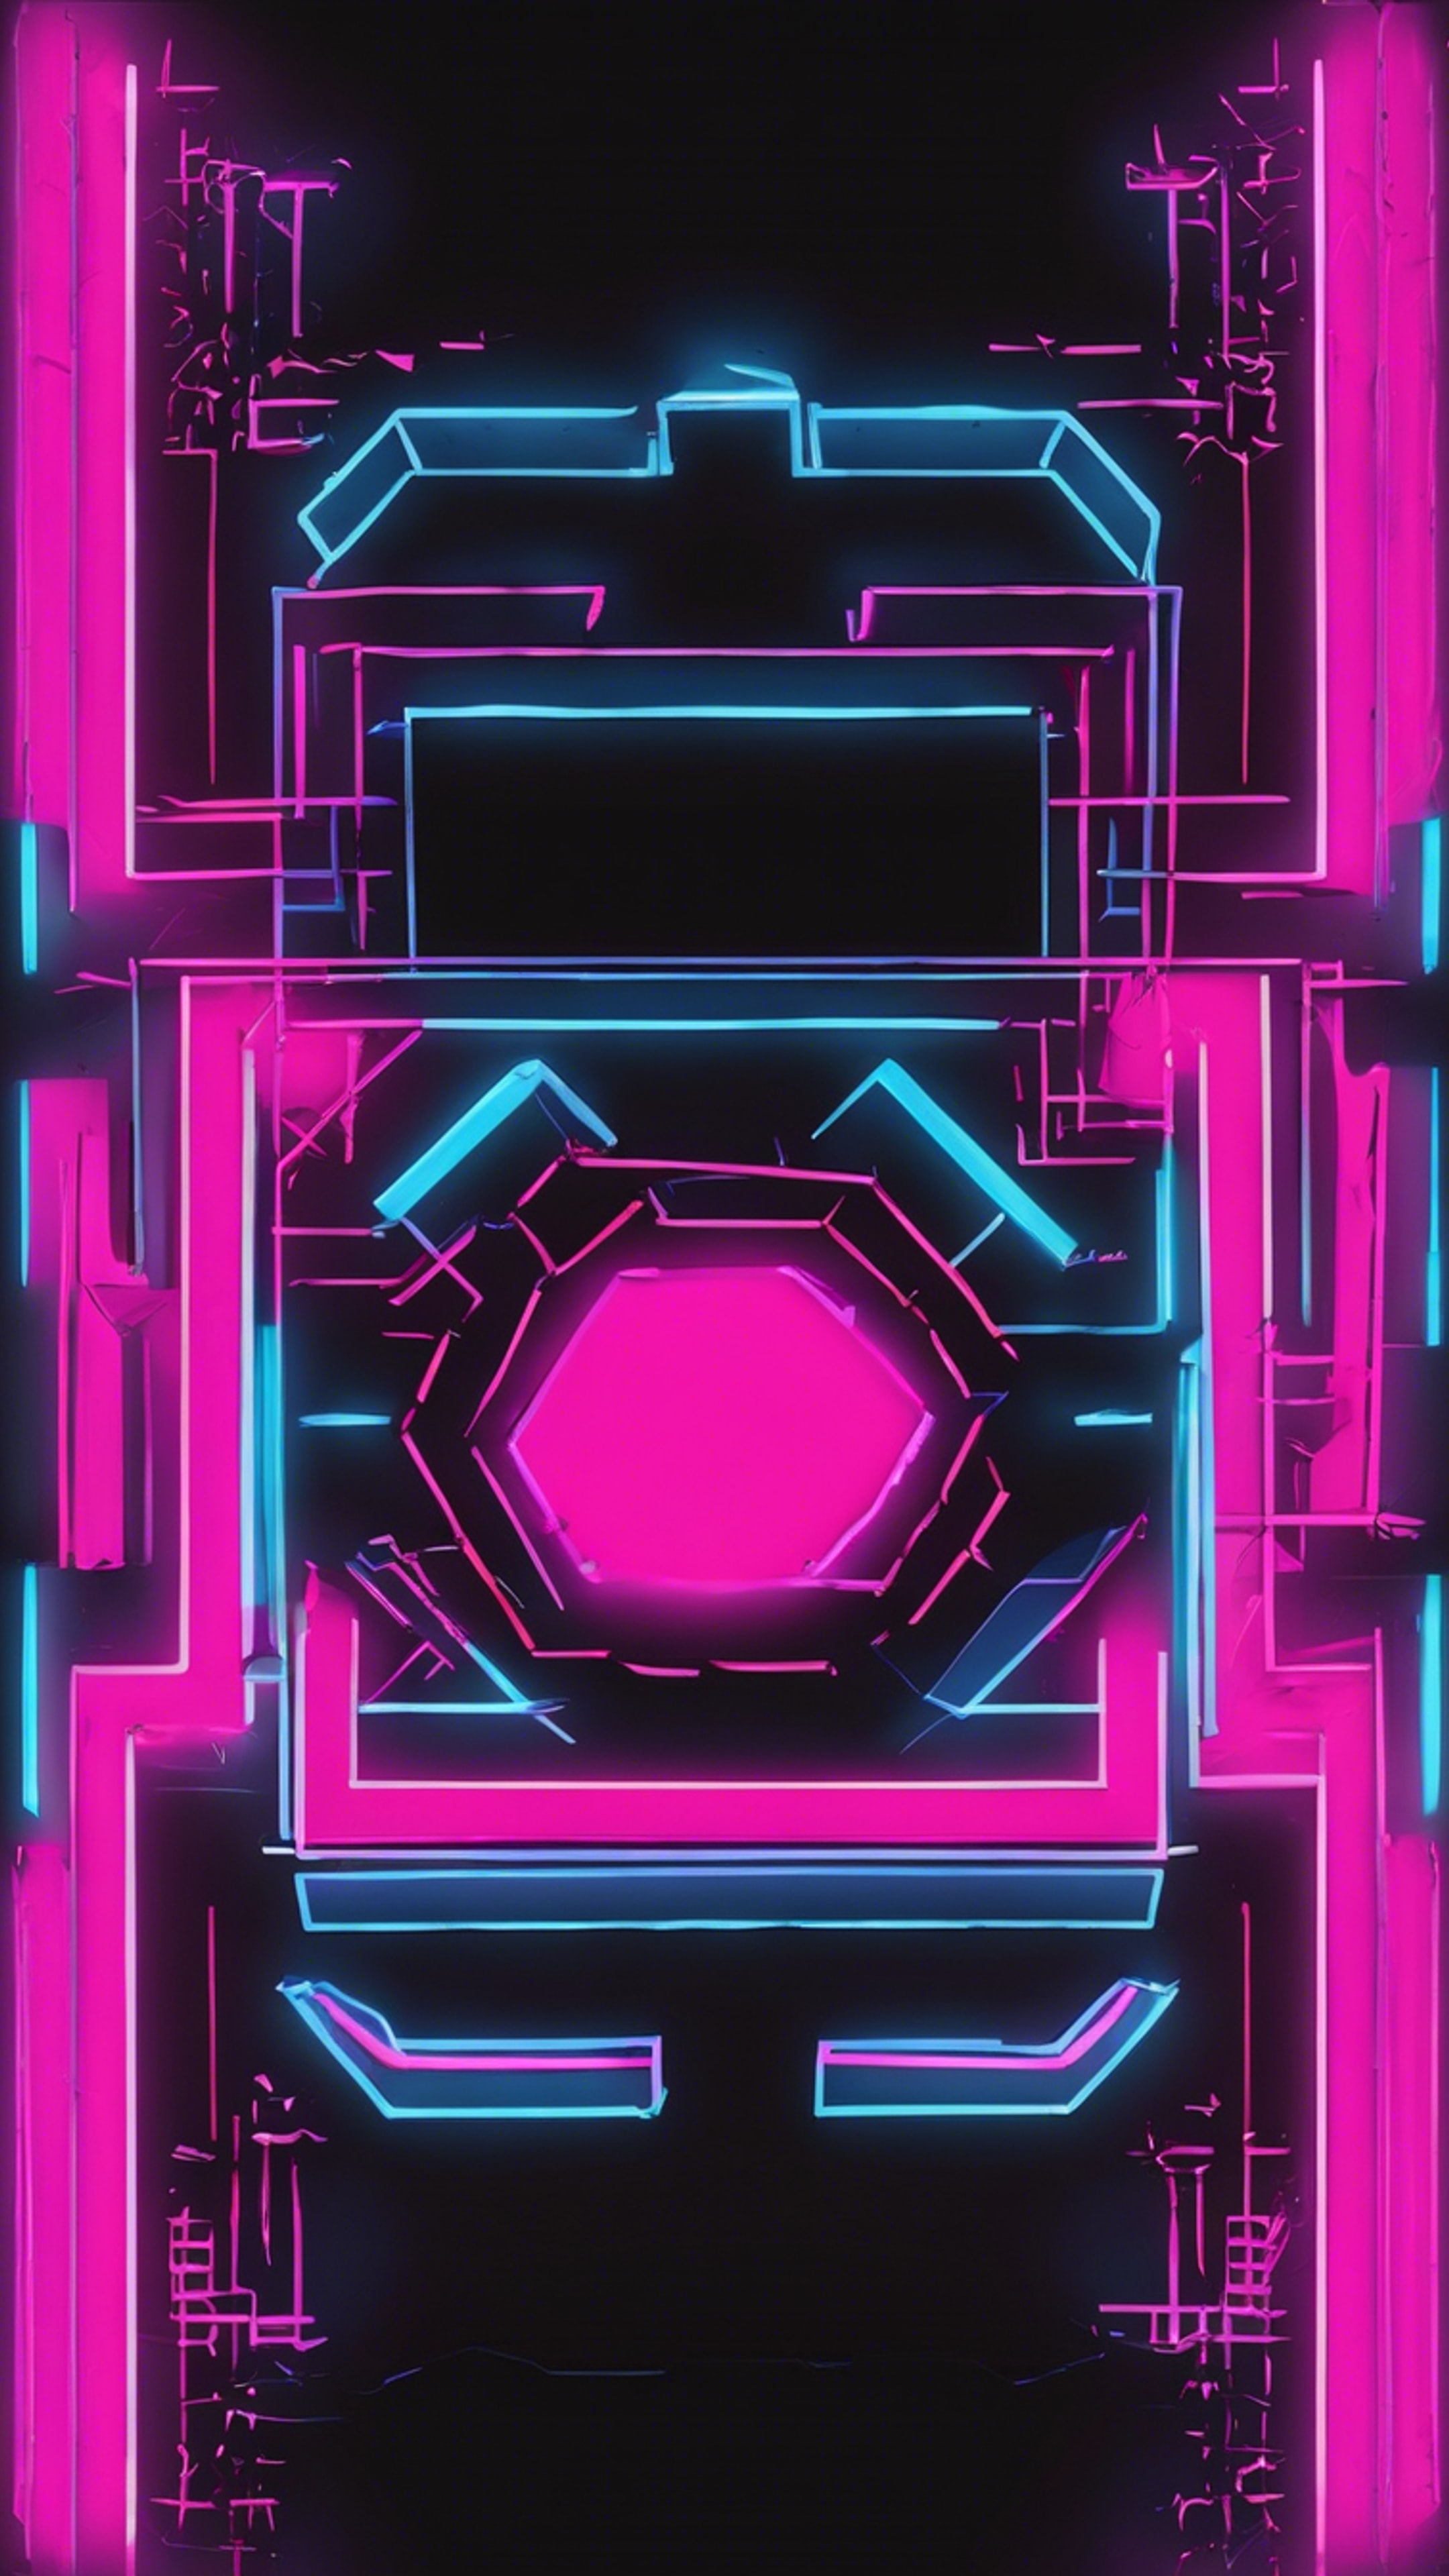 Bright neon pink and blue geometric shapes against a black background, reminiscent of 80s arcade games. Tapet[dd42a0f55e3e425295c8]